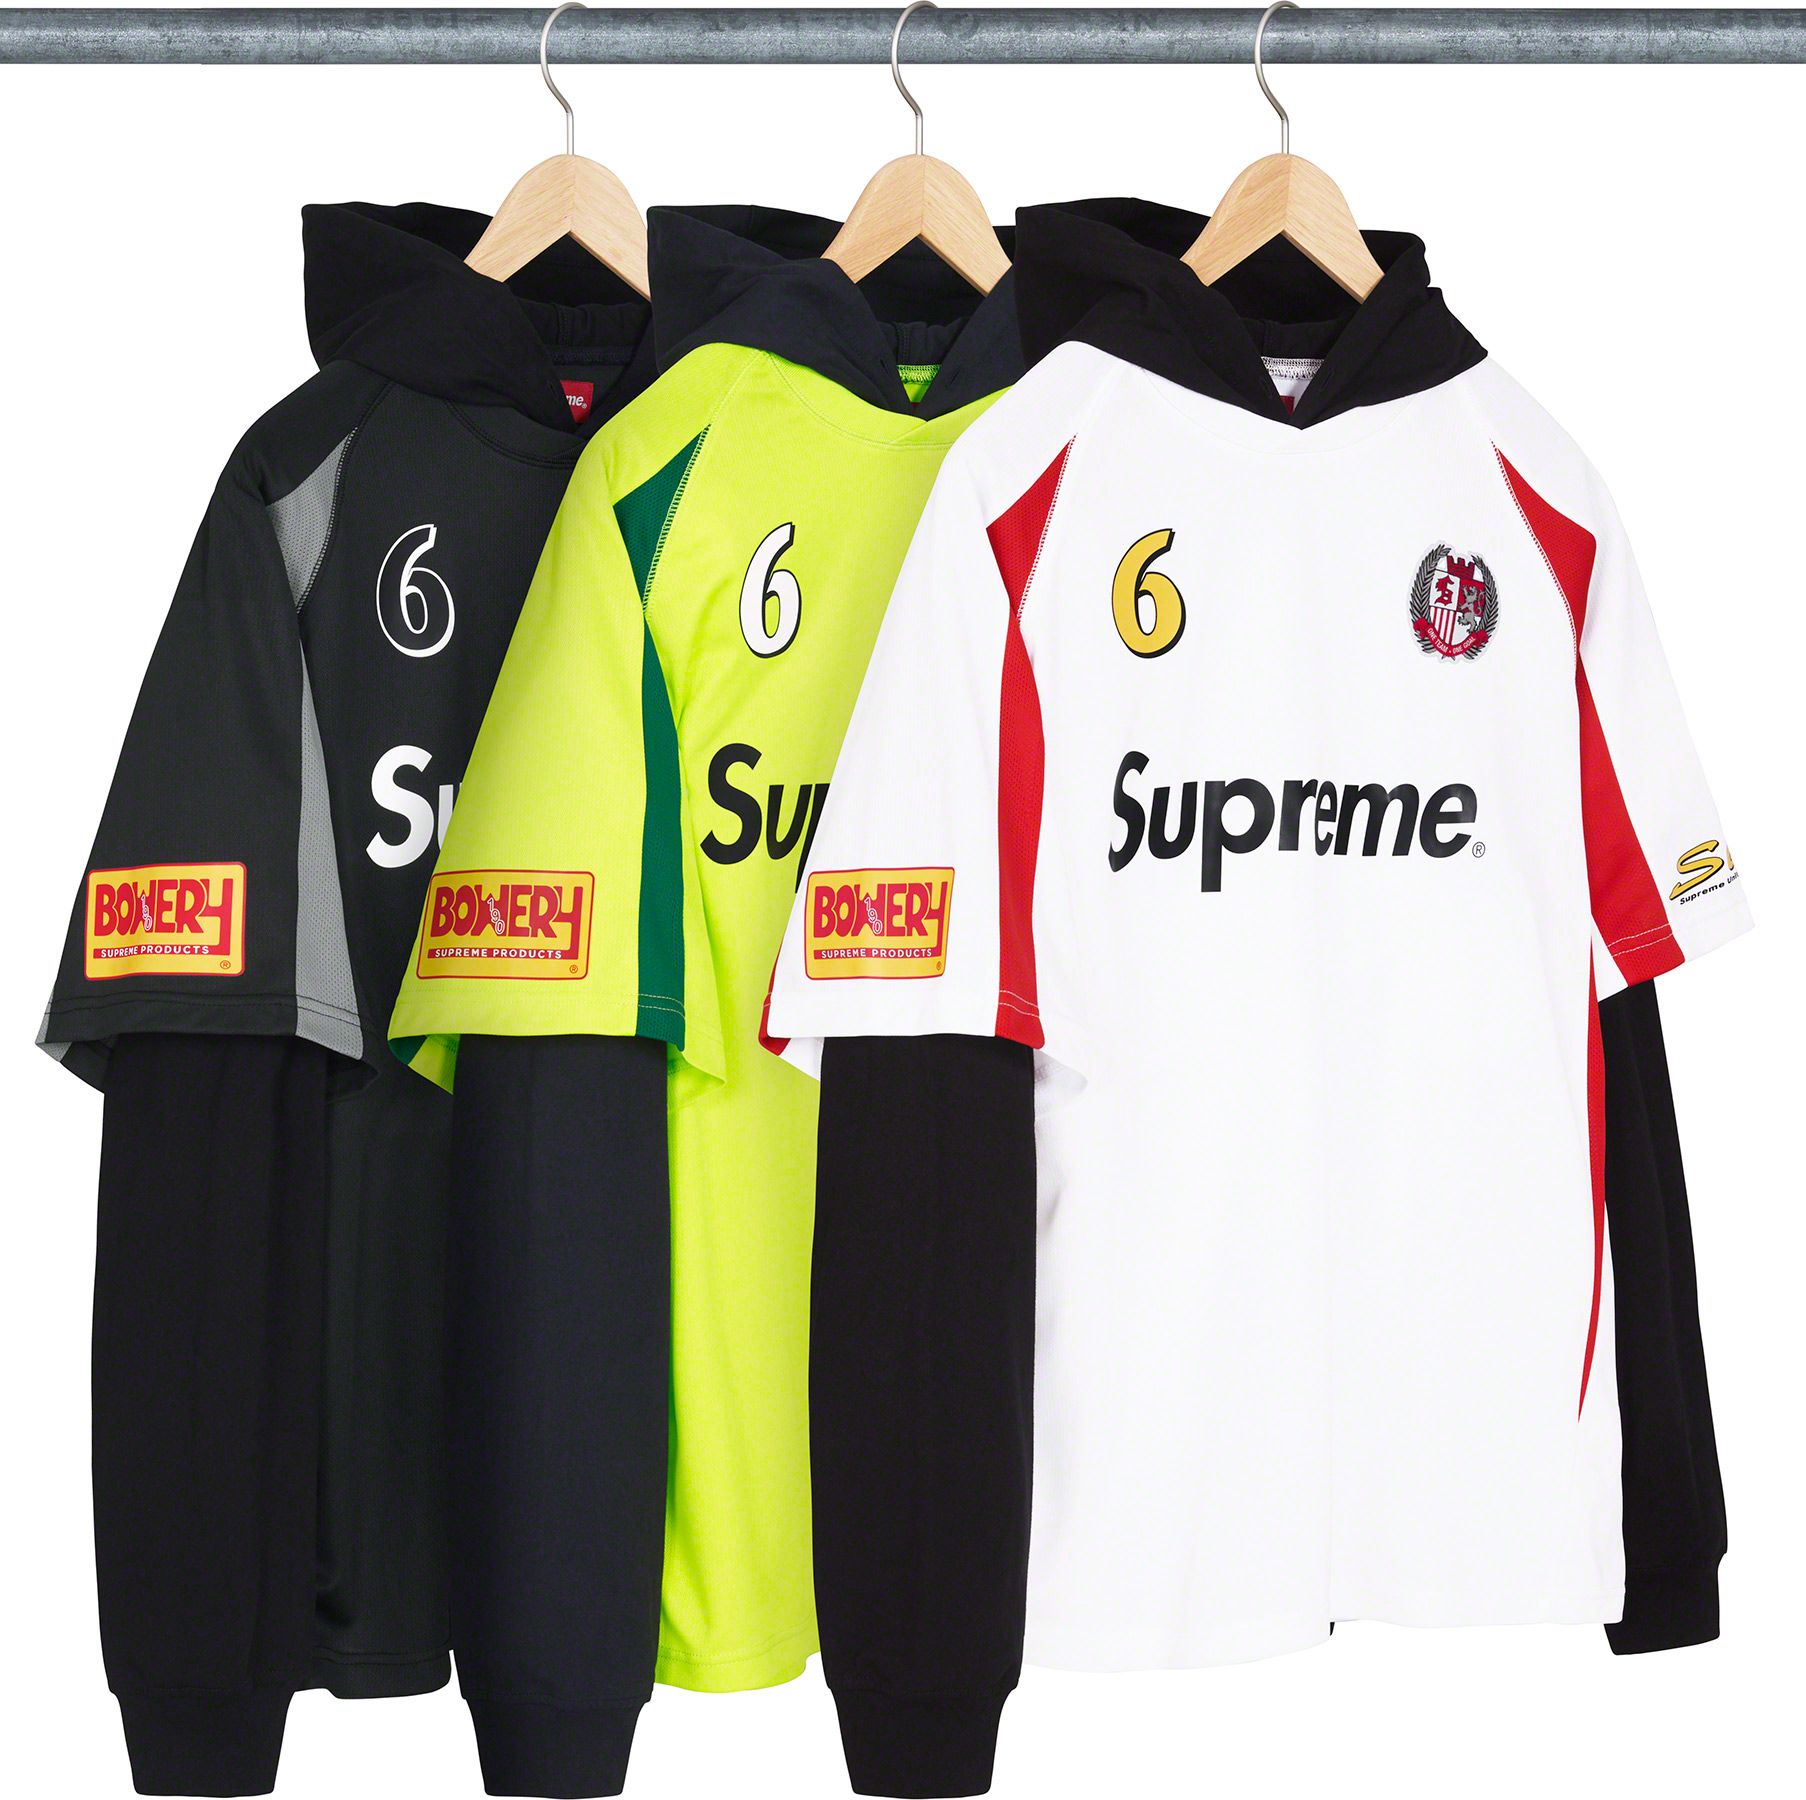 Supreme Hooded Soccer Jersey / XL